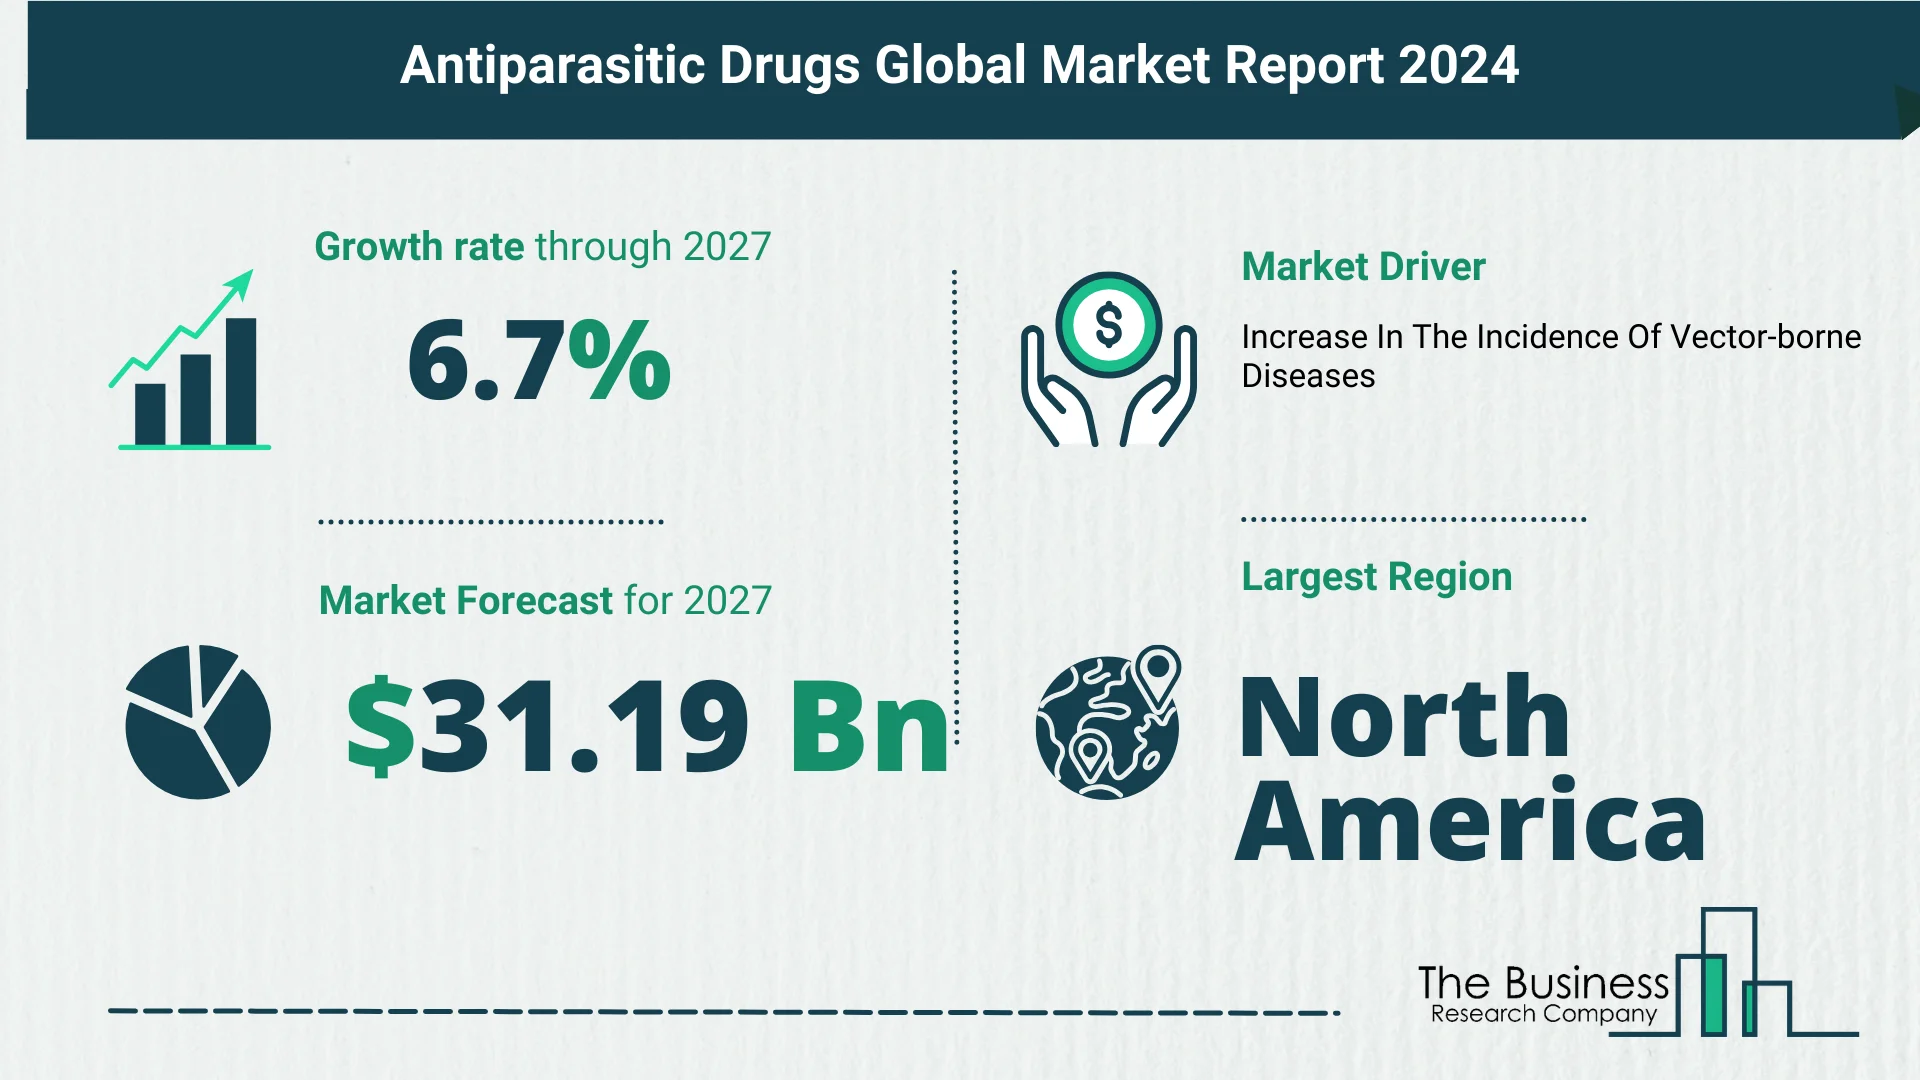 Top 5 Insights From The Antiparasitic Drugs Market Report 2024